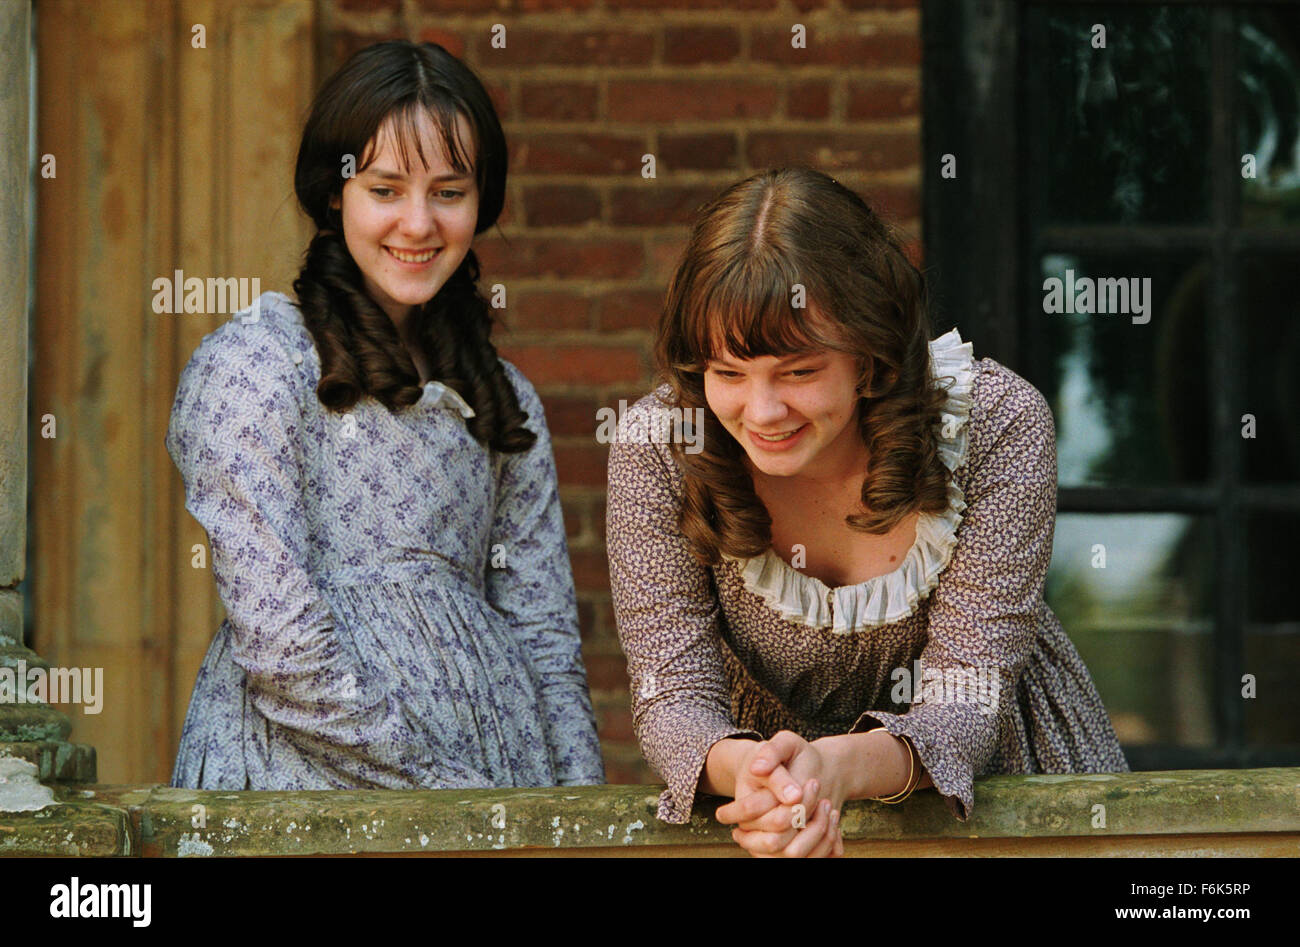 RELEASE DATE: November 23, 2005. MOVIE TITLE: Pride and Prejudice. STUDIO: Focus Features. PLOT: The story is based on Jane Austen's novel about five sisters - Jane, Elizabeth, Mary, Kitty and Lydia Bennet - in Georgian England. Their lives are turned upside down when a wealthy young man (Mr. Bingley) and his best friend (Mr. Darcy) arrive in their neighborhood. PICTURED: JENA MALONE (left) as Lydia Bennet and CAREY MULLIGAN (right) as Kitty Bennet. Stock Photo